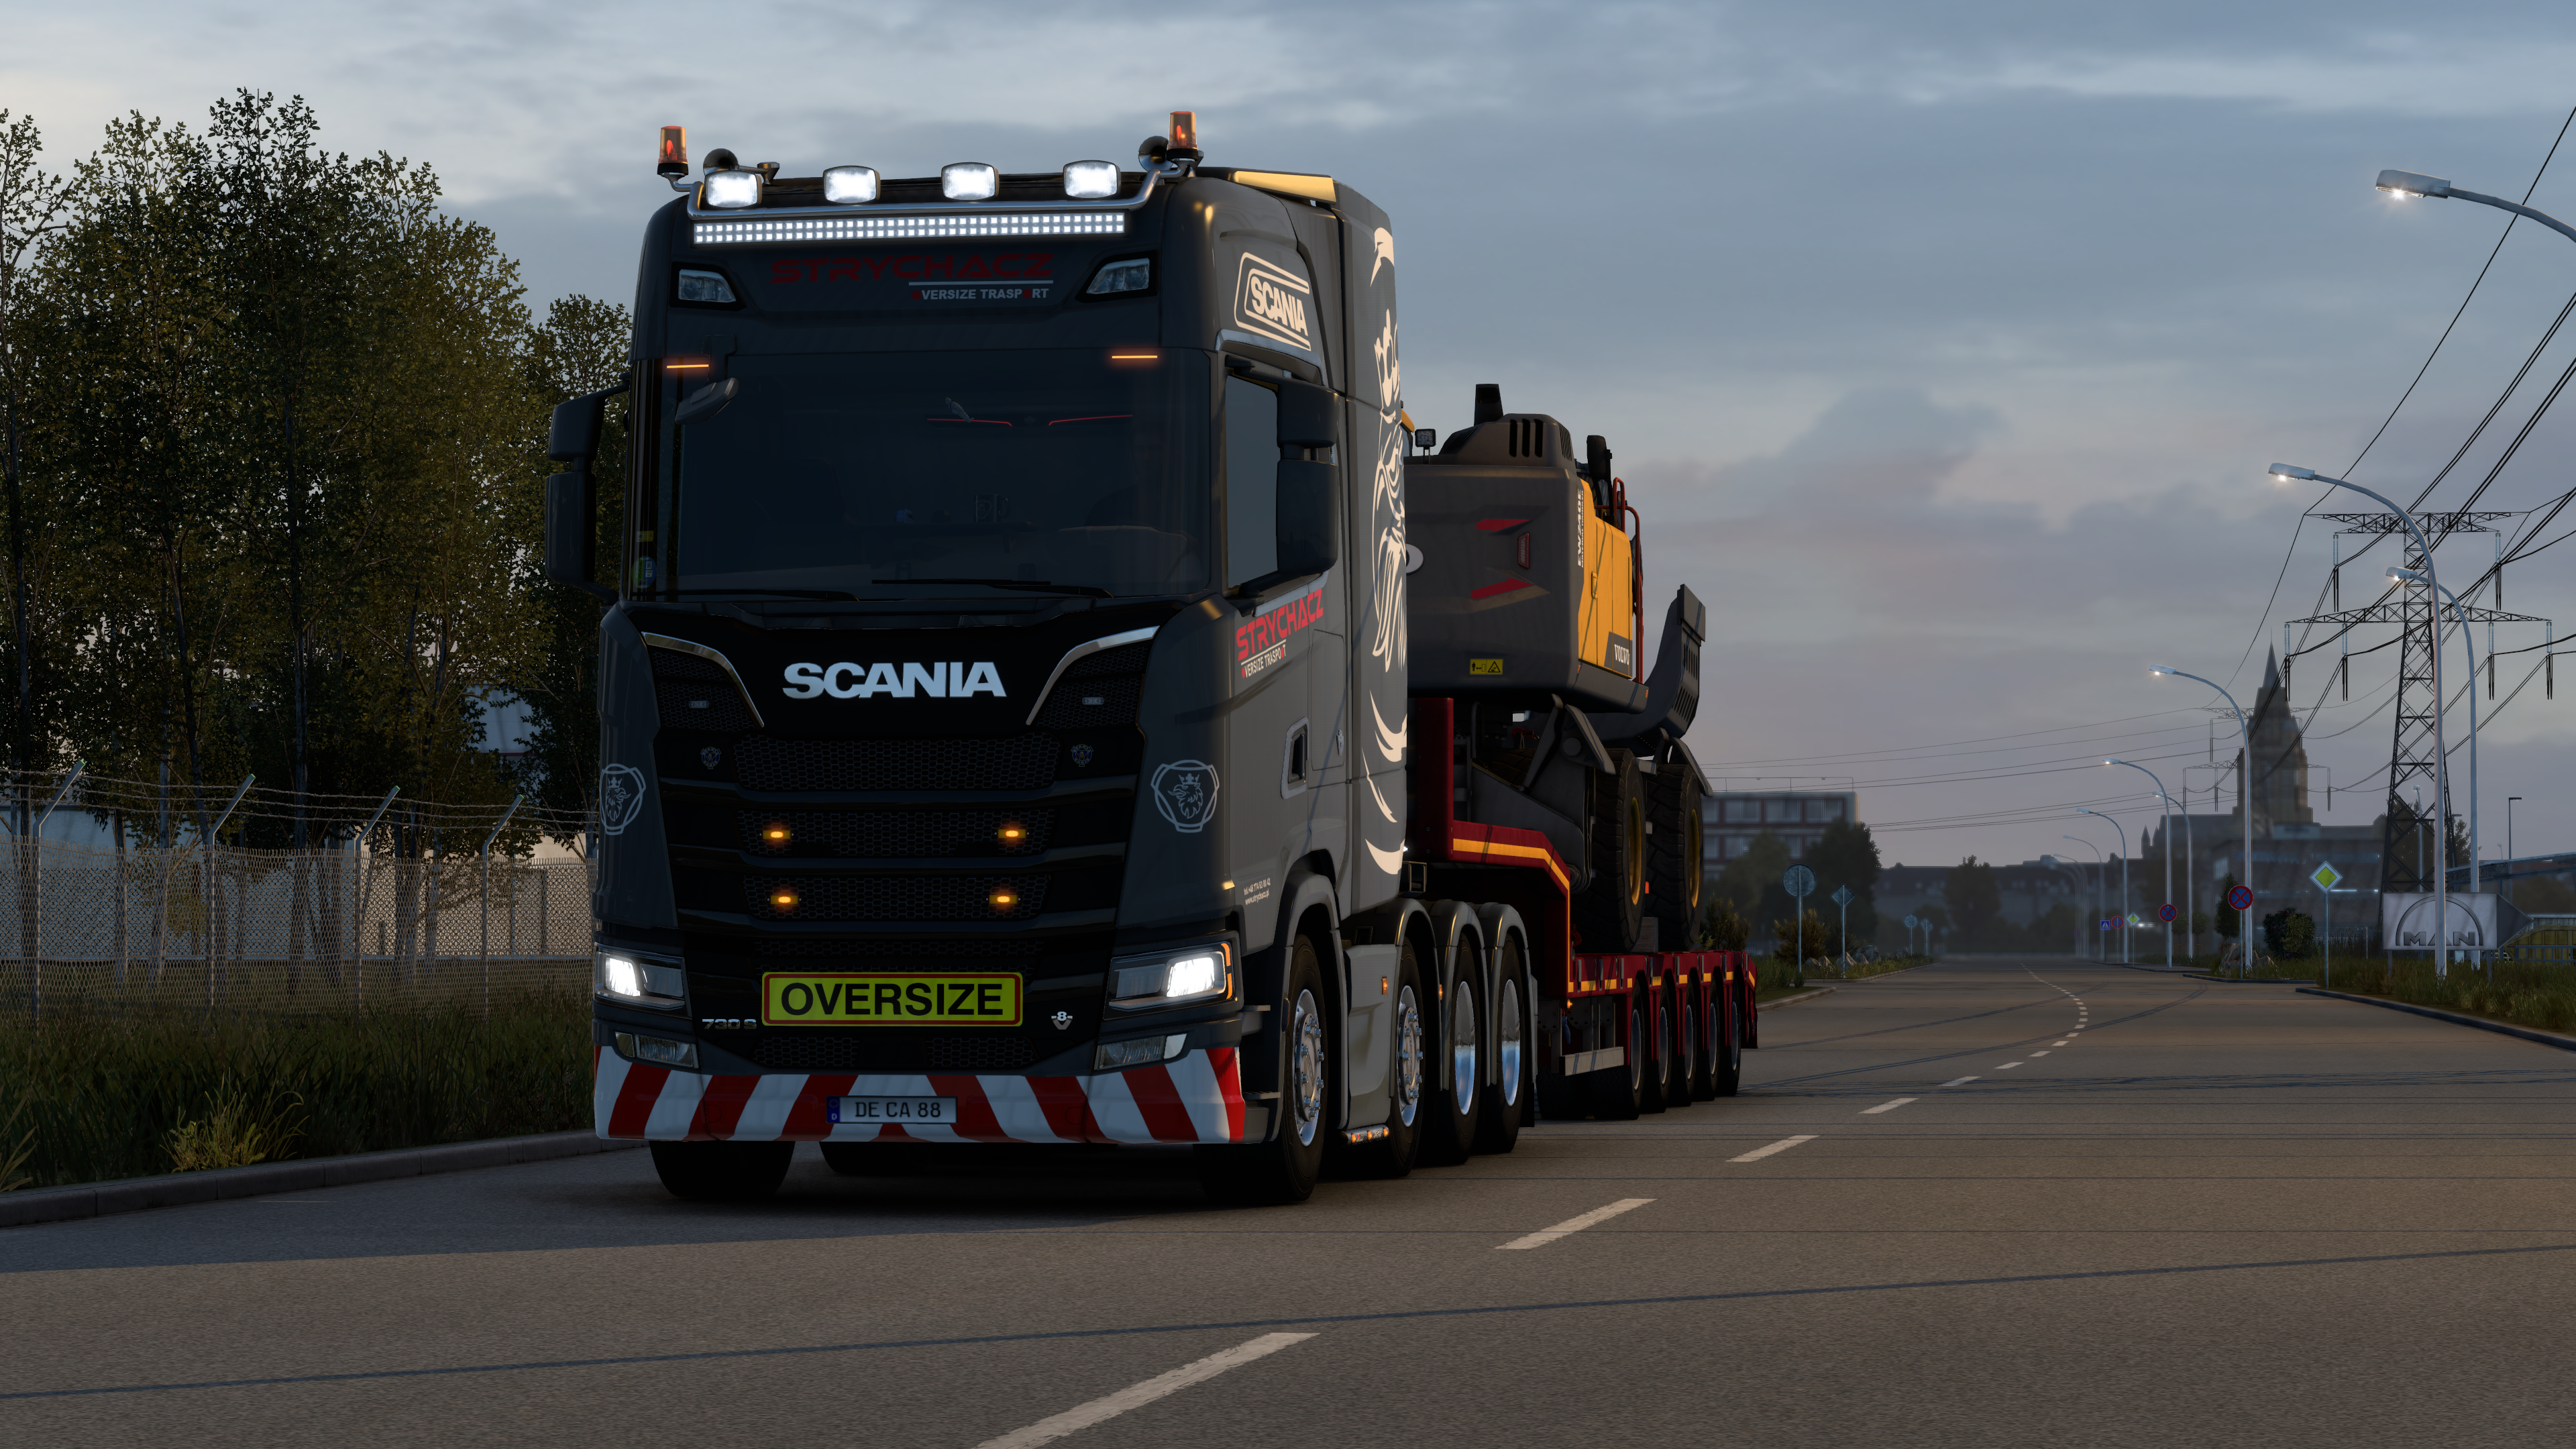 Scania Truck Euro Truck Simulator 2 Video Games CGi Street Light Sky Clouds Front Angle View Headlig 3840x2160